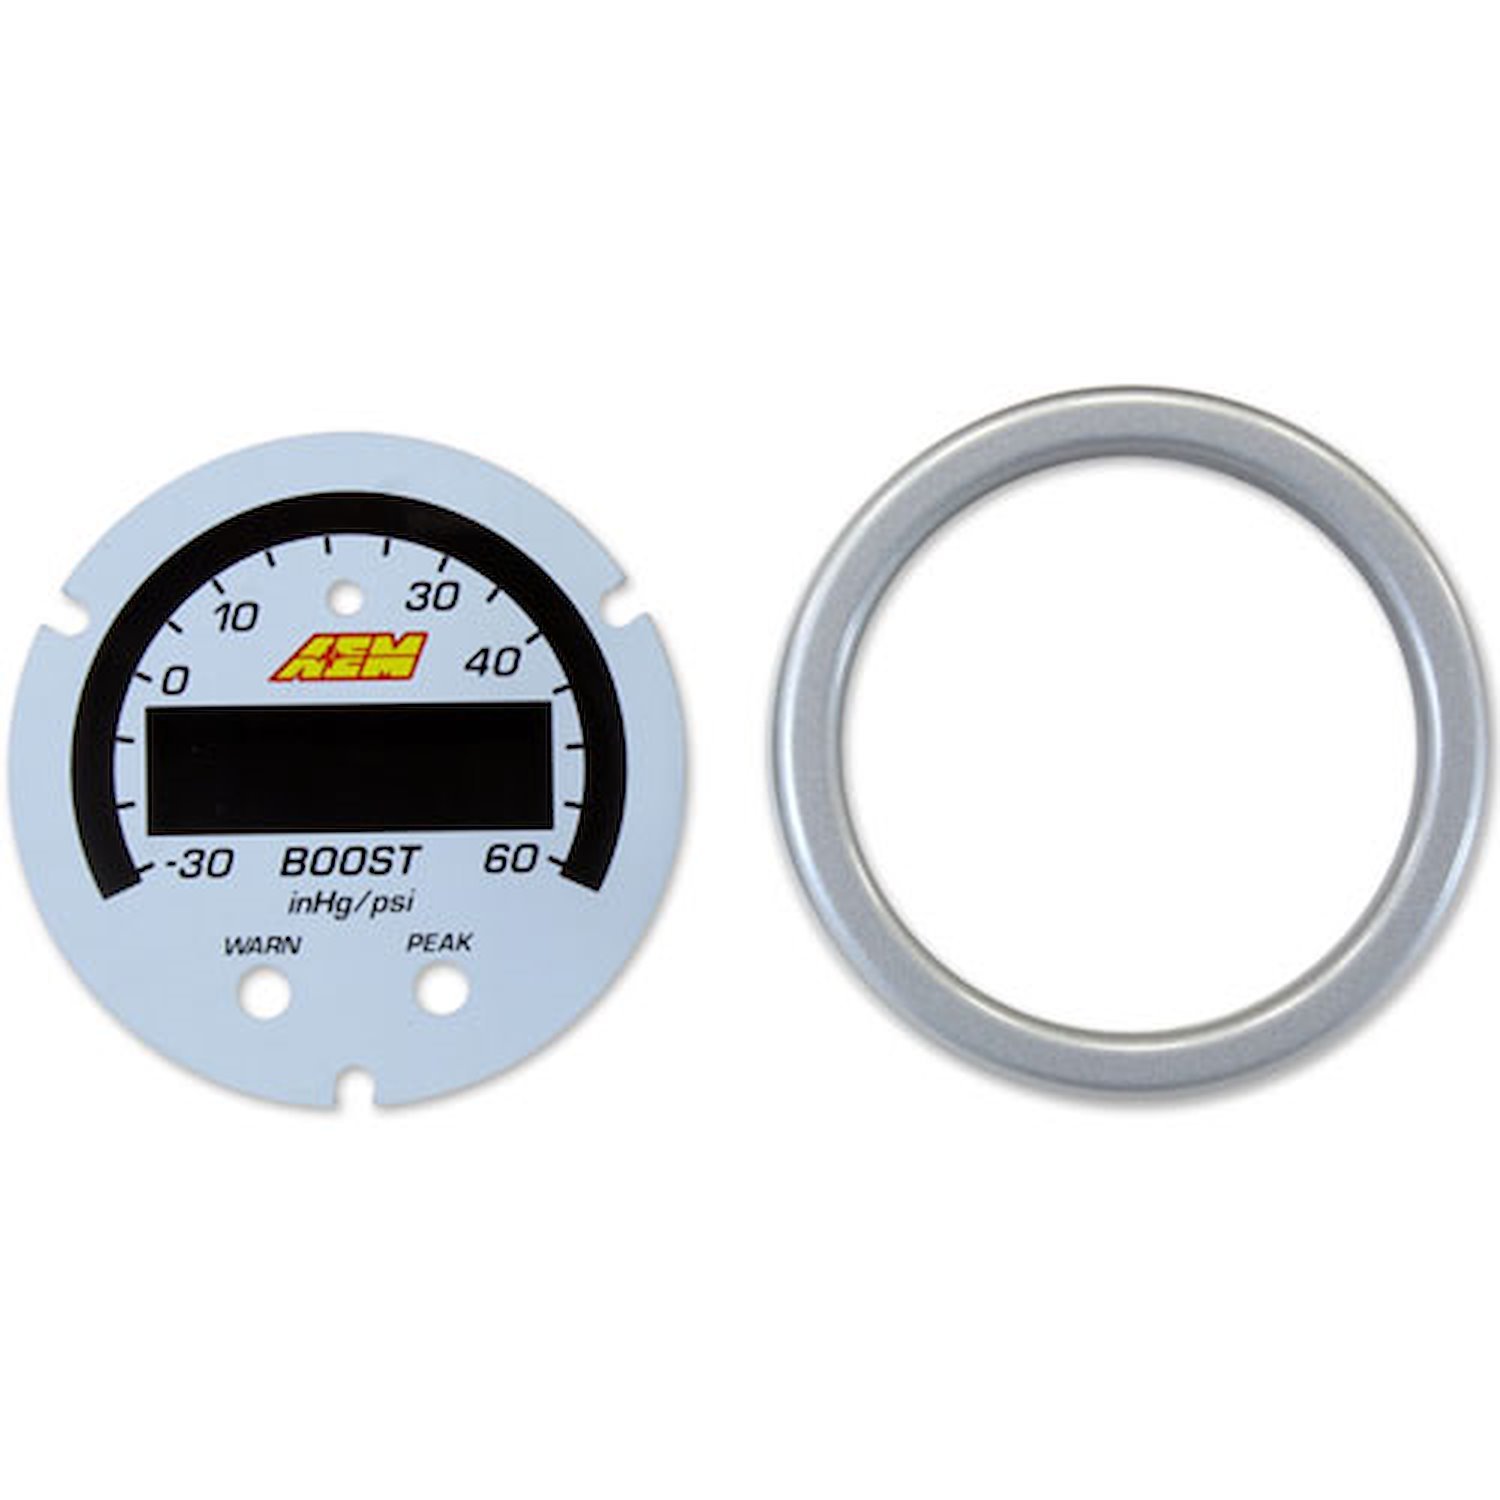 X-Series Boost Pressure Gauge Accessory Kit Includes Silver Bezel And White Faceplate